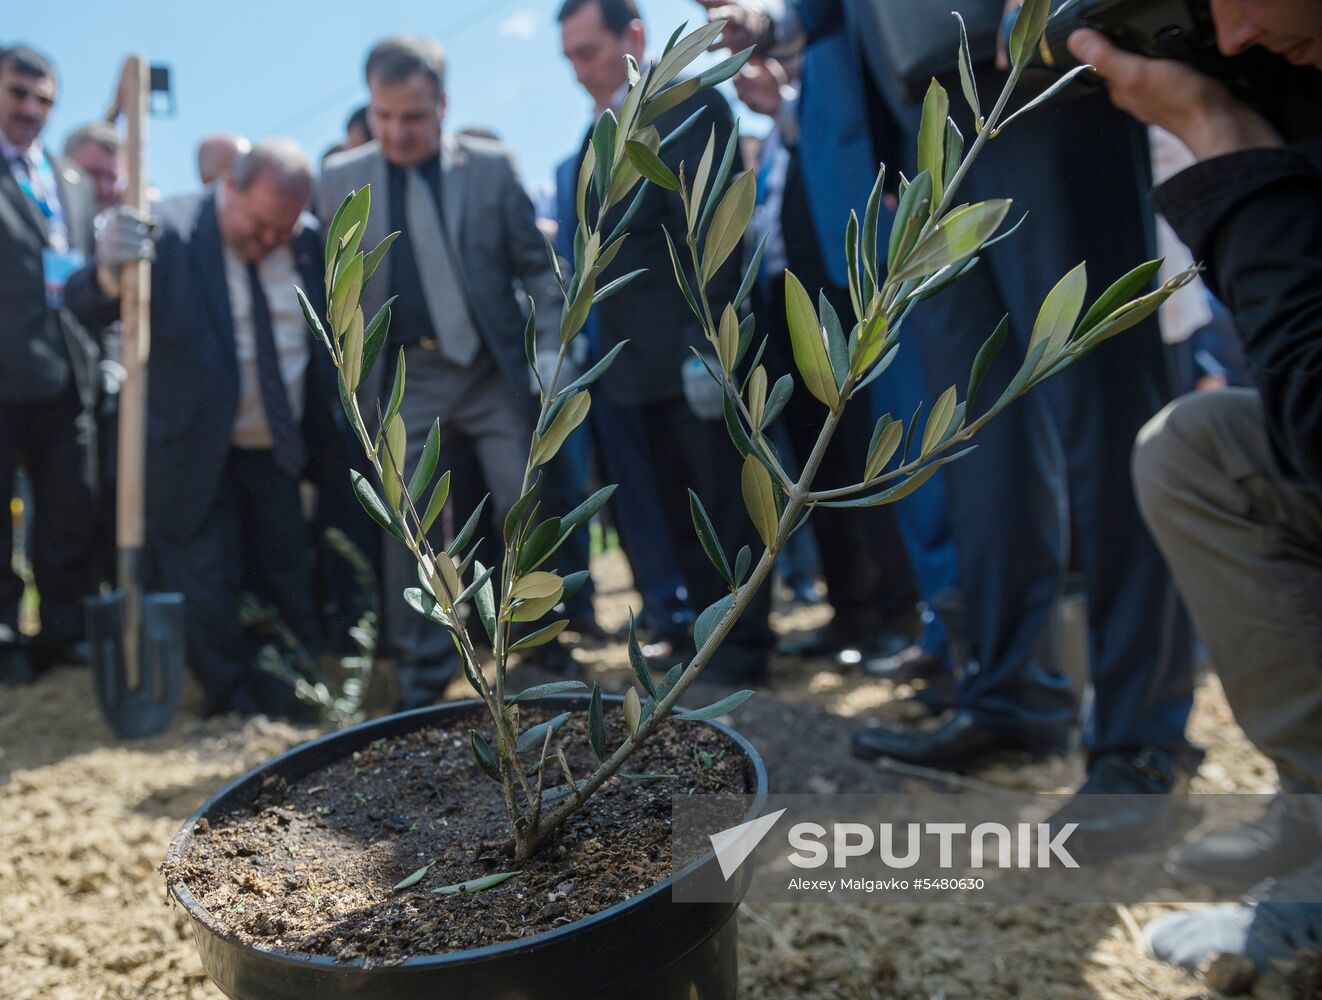 Russian-Syrian Friendship Olive Alley planted in Yalta